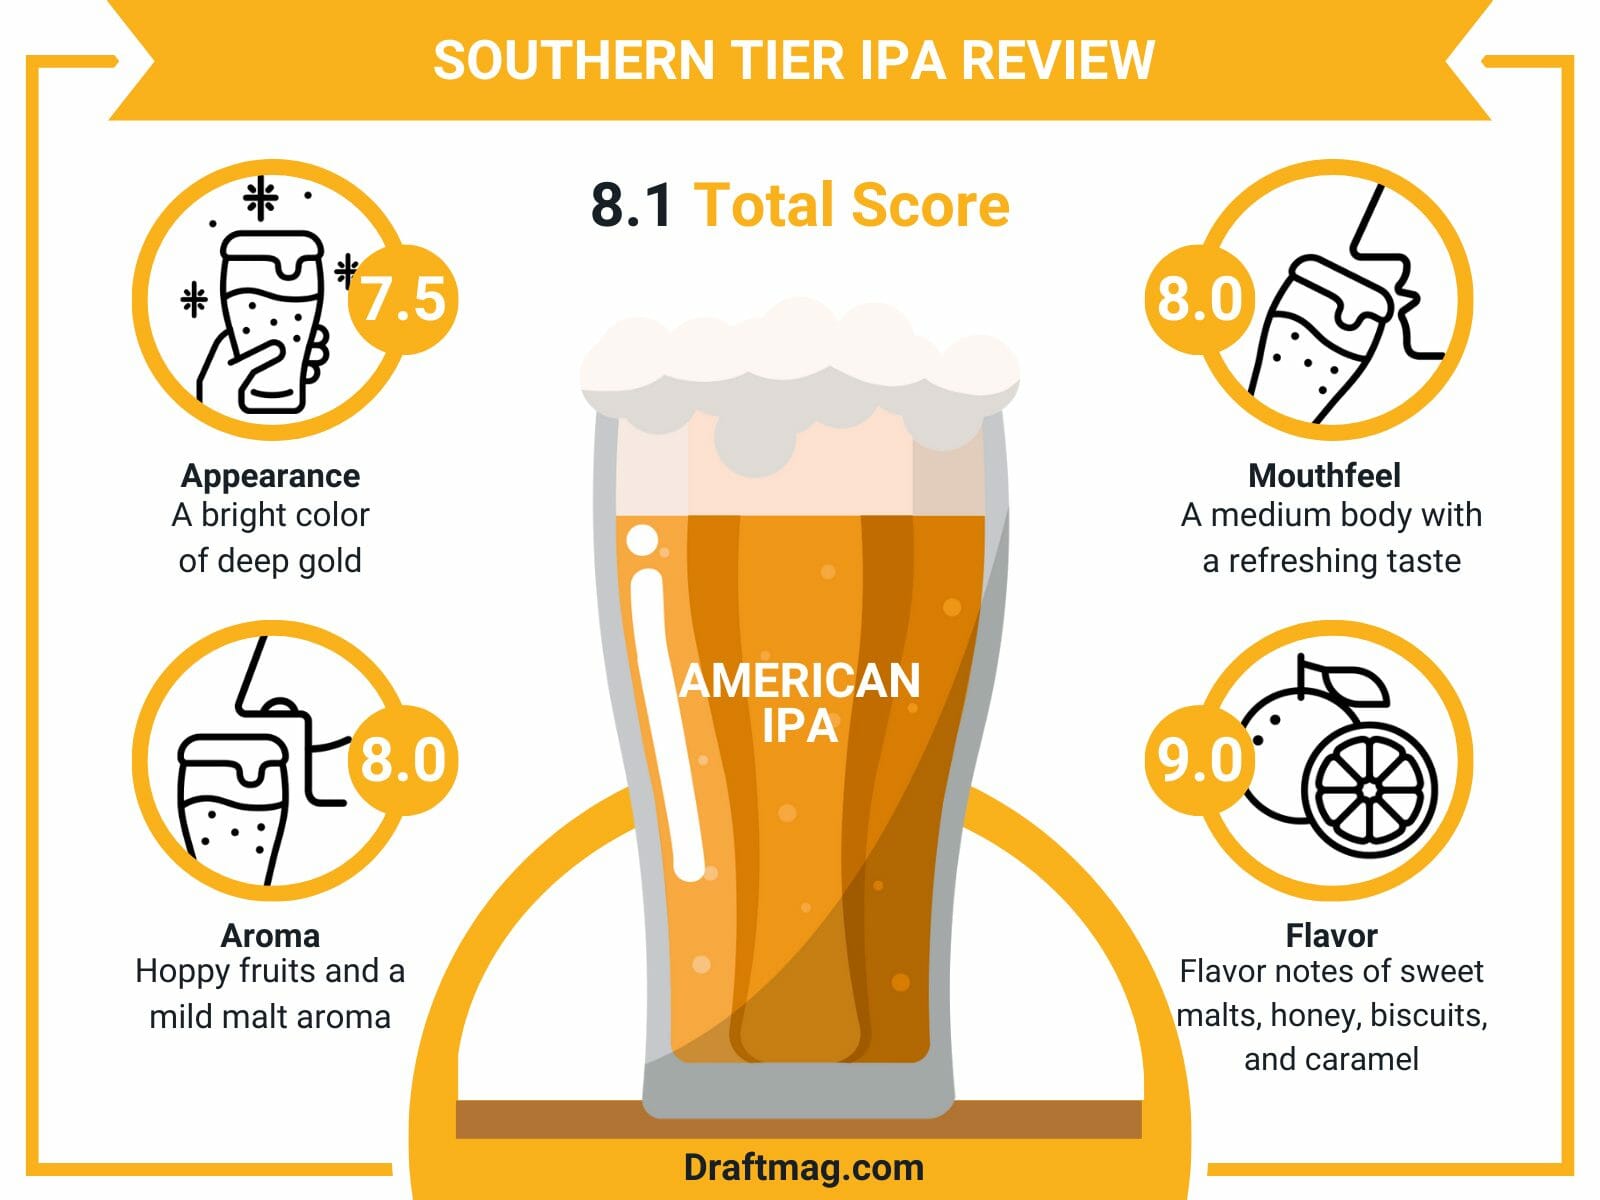 Southern tier ipa review infographic